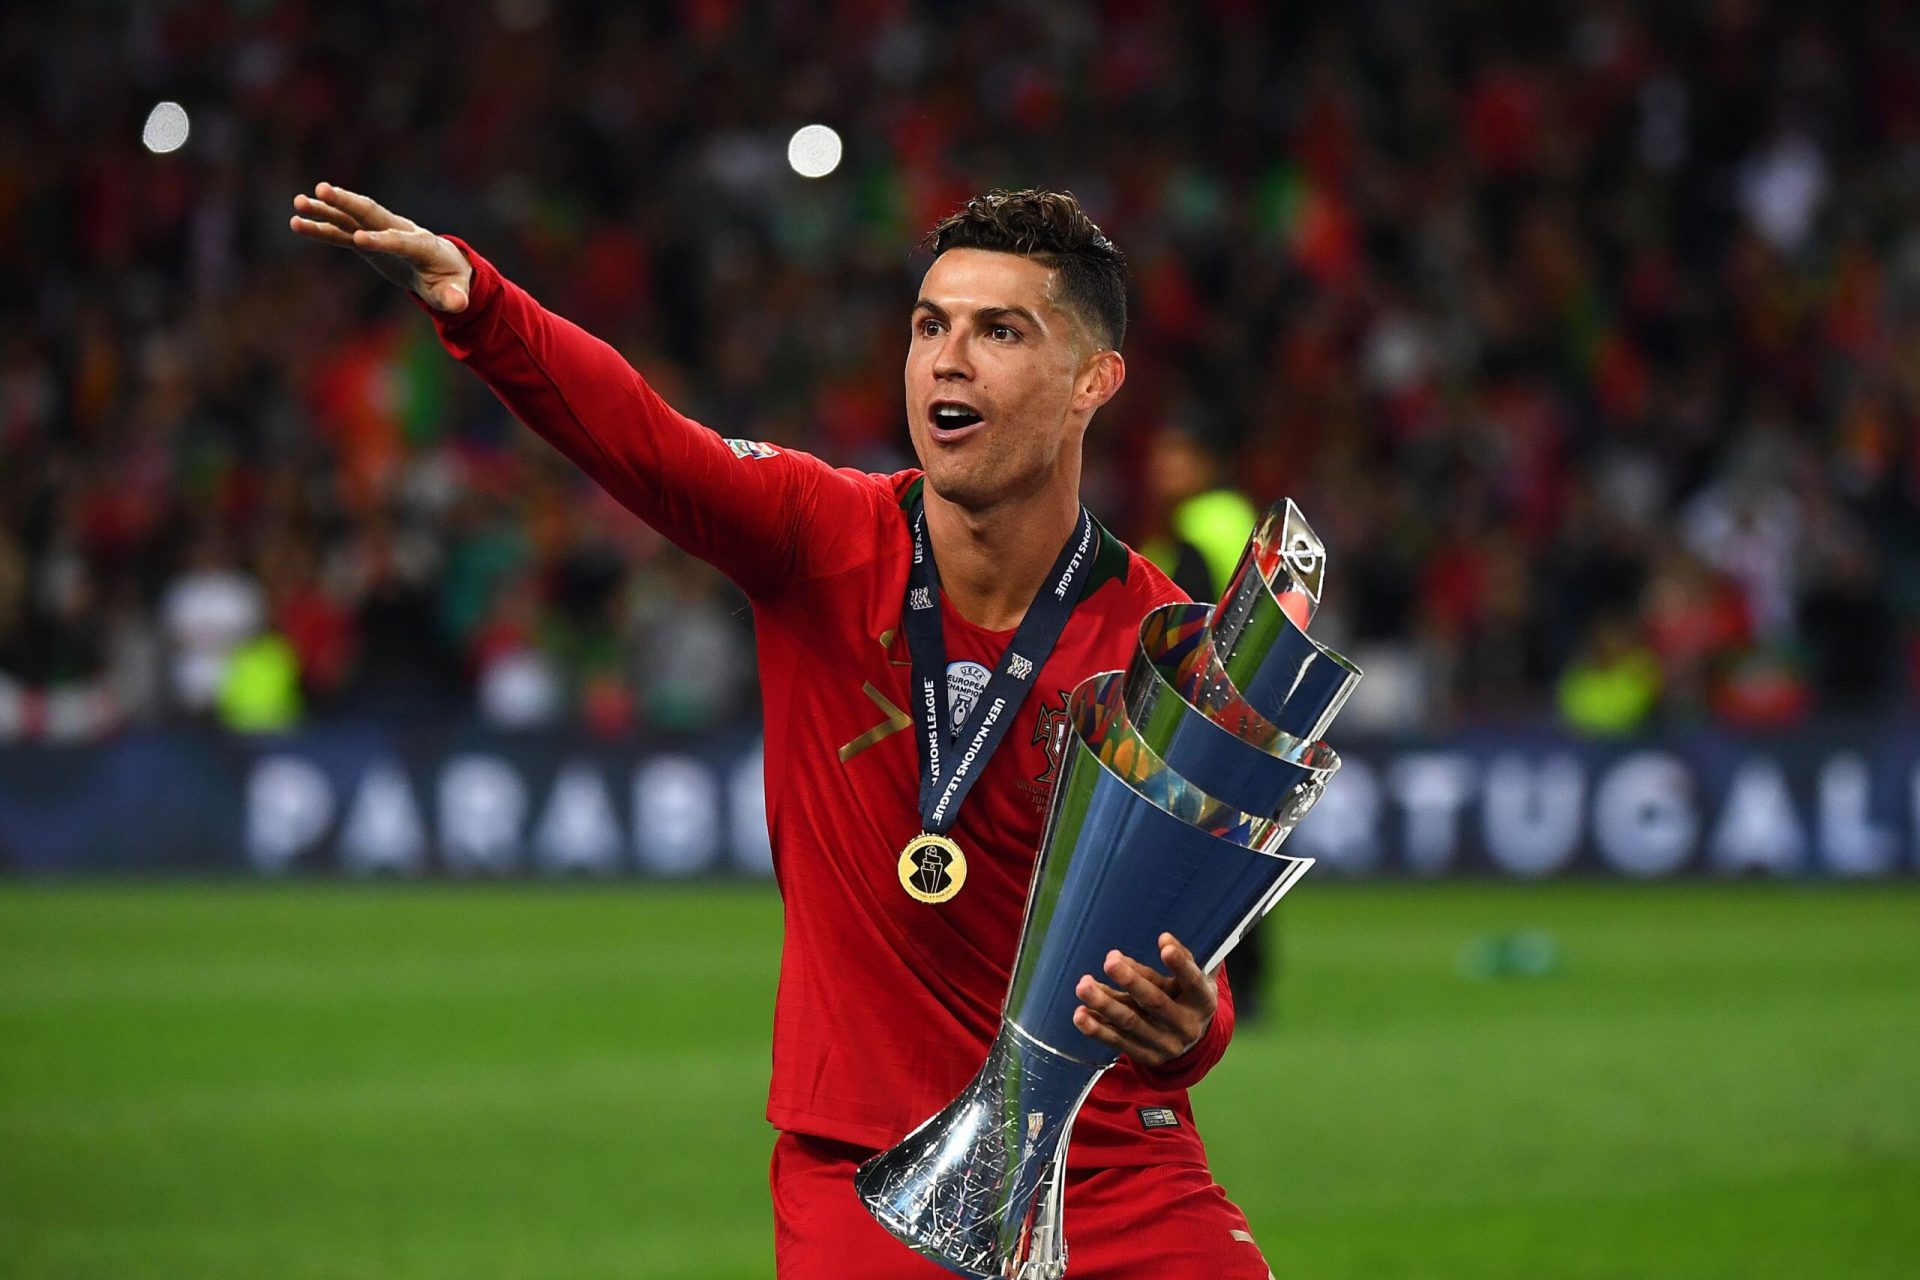 It Is Easier To Win With The Best In The World Ronaldo, Admits Bruno Fernandes